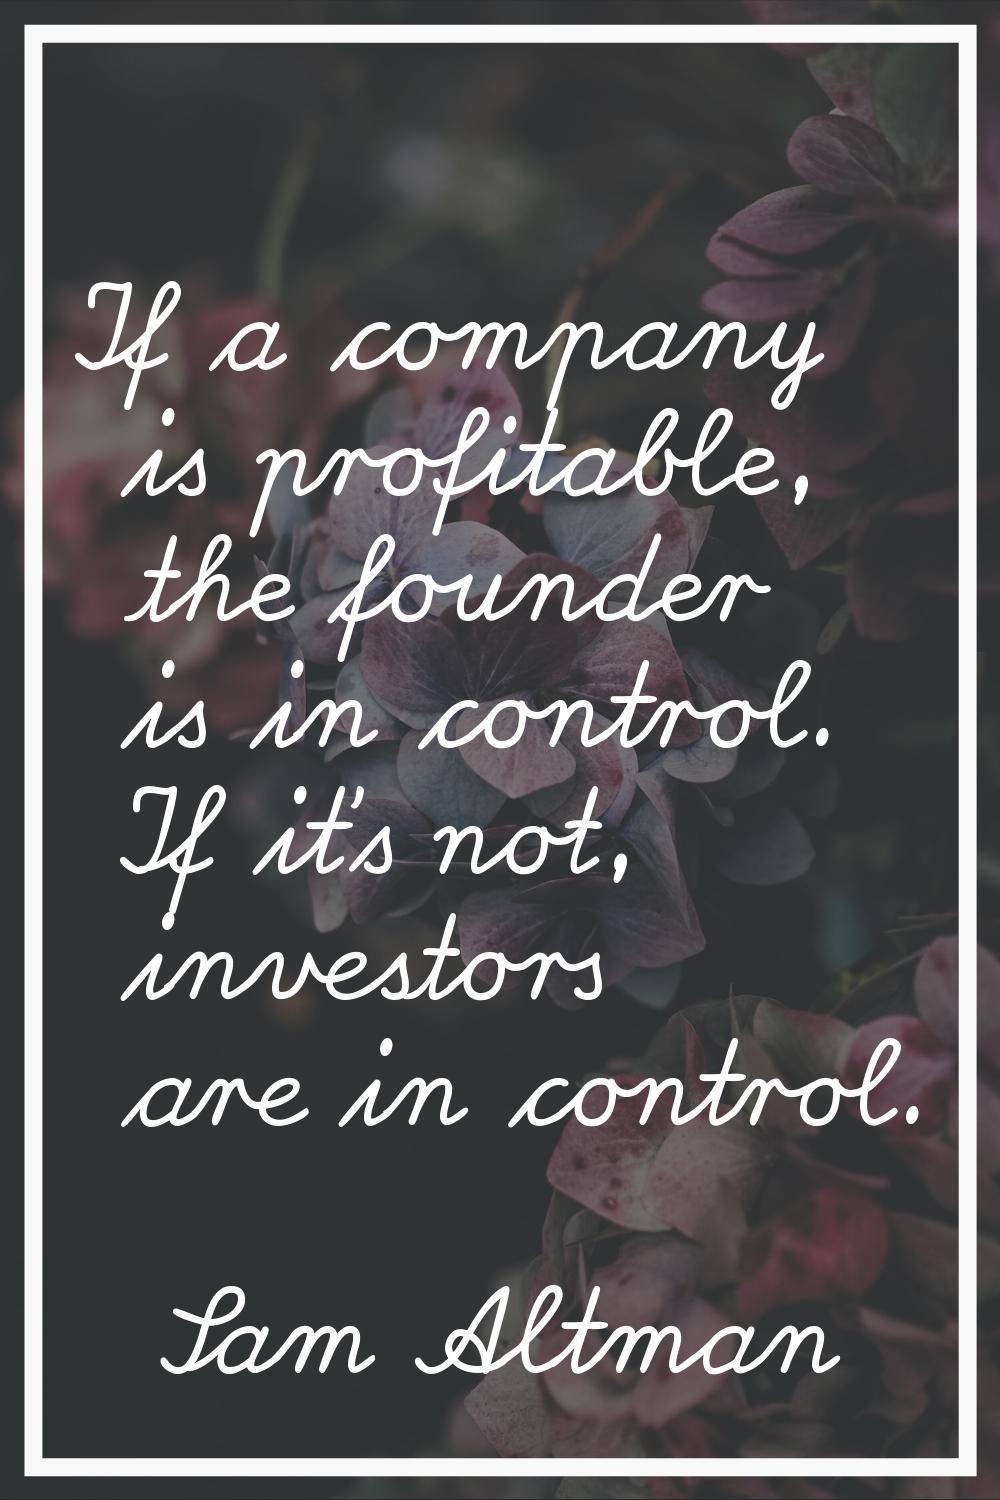 If a company is profitable, the founder is in control. If it's not, investors are in control.